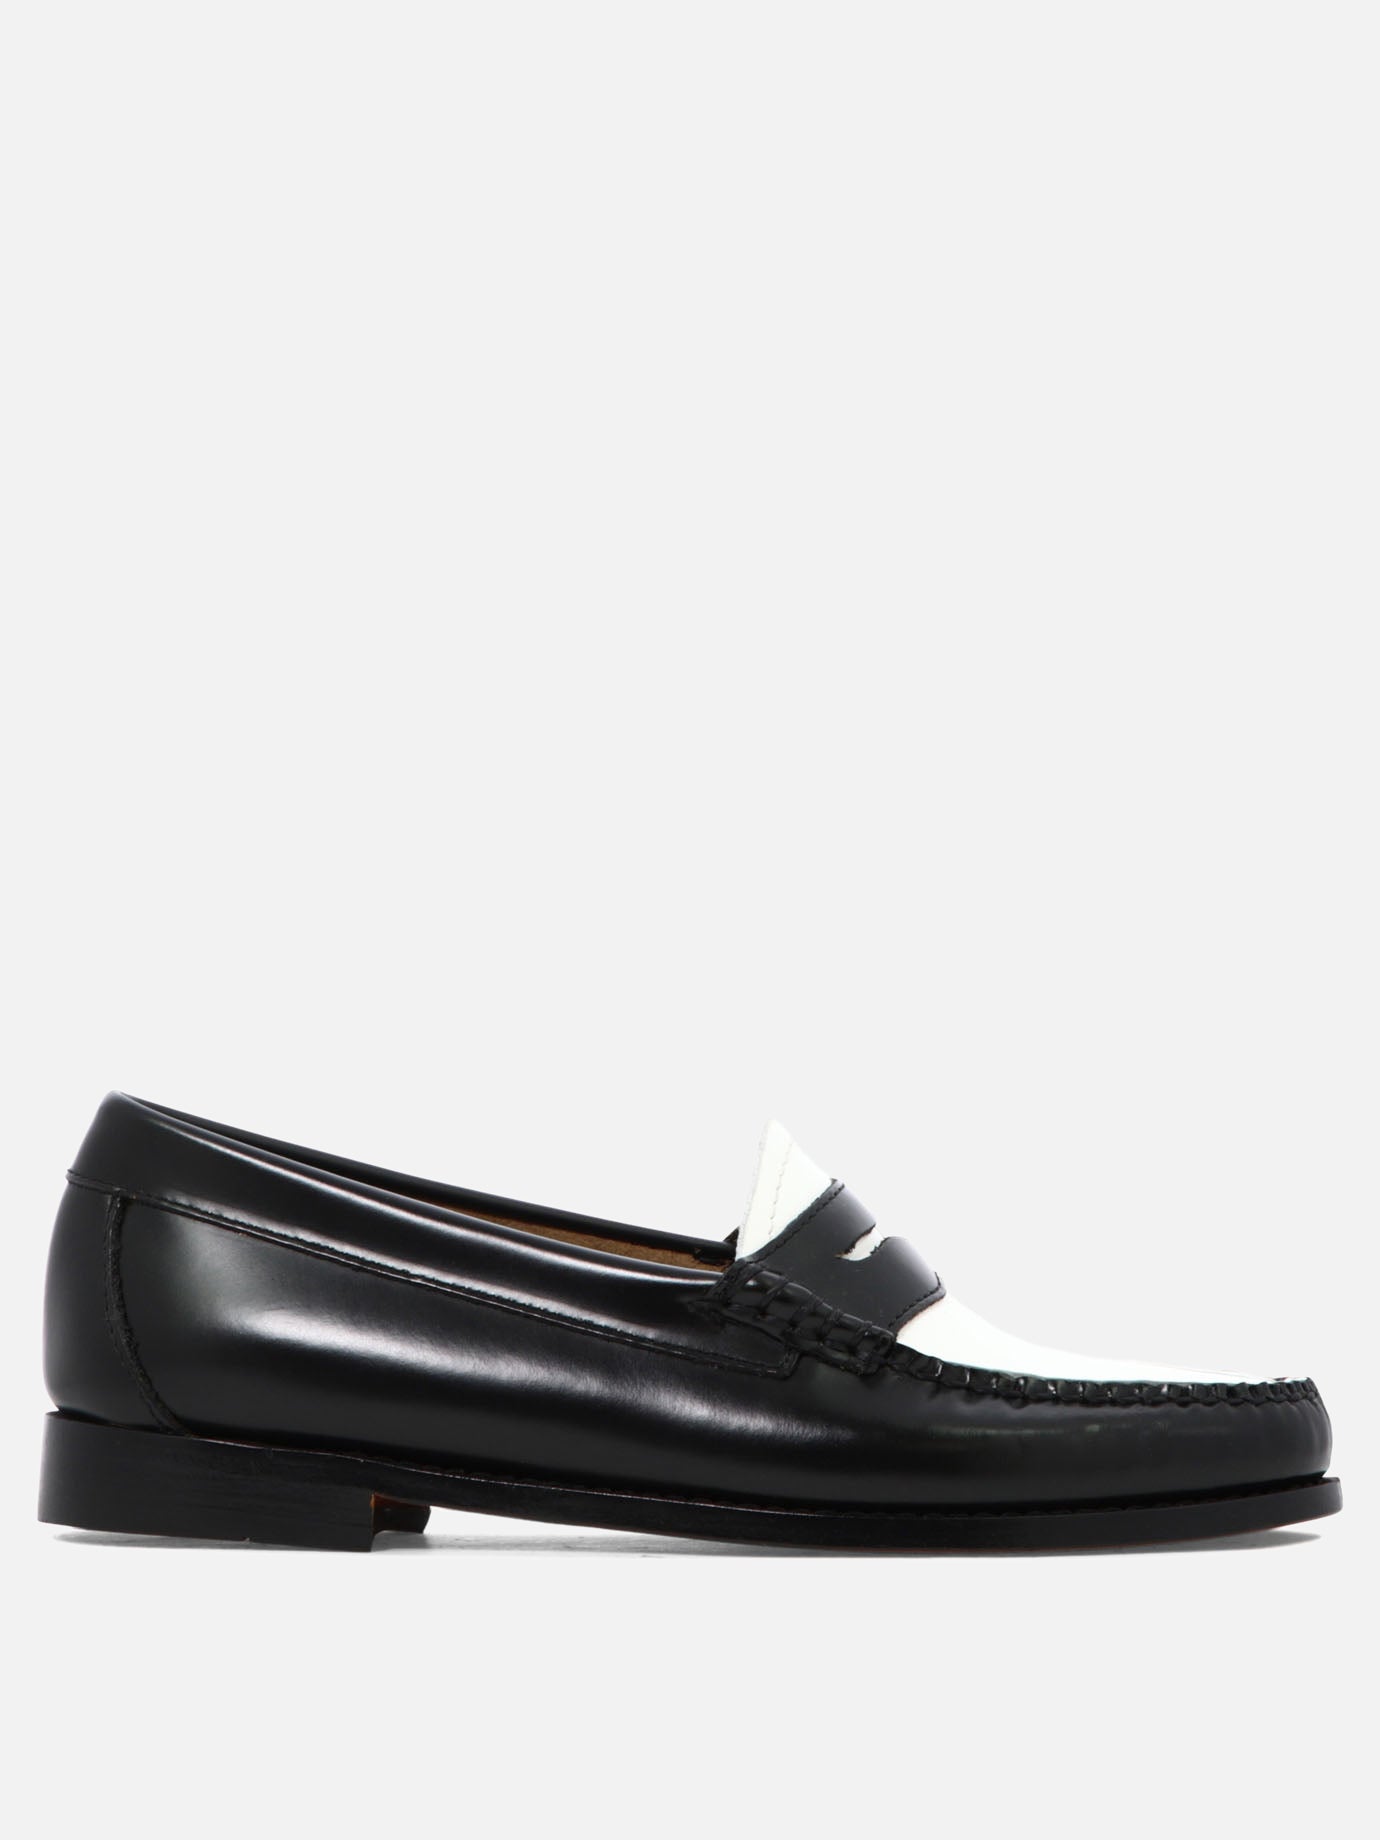 "Weejuns Penny" loafers